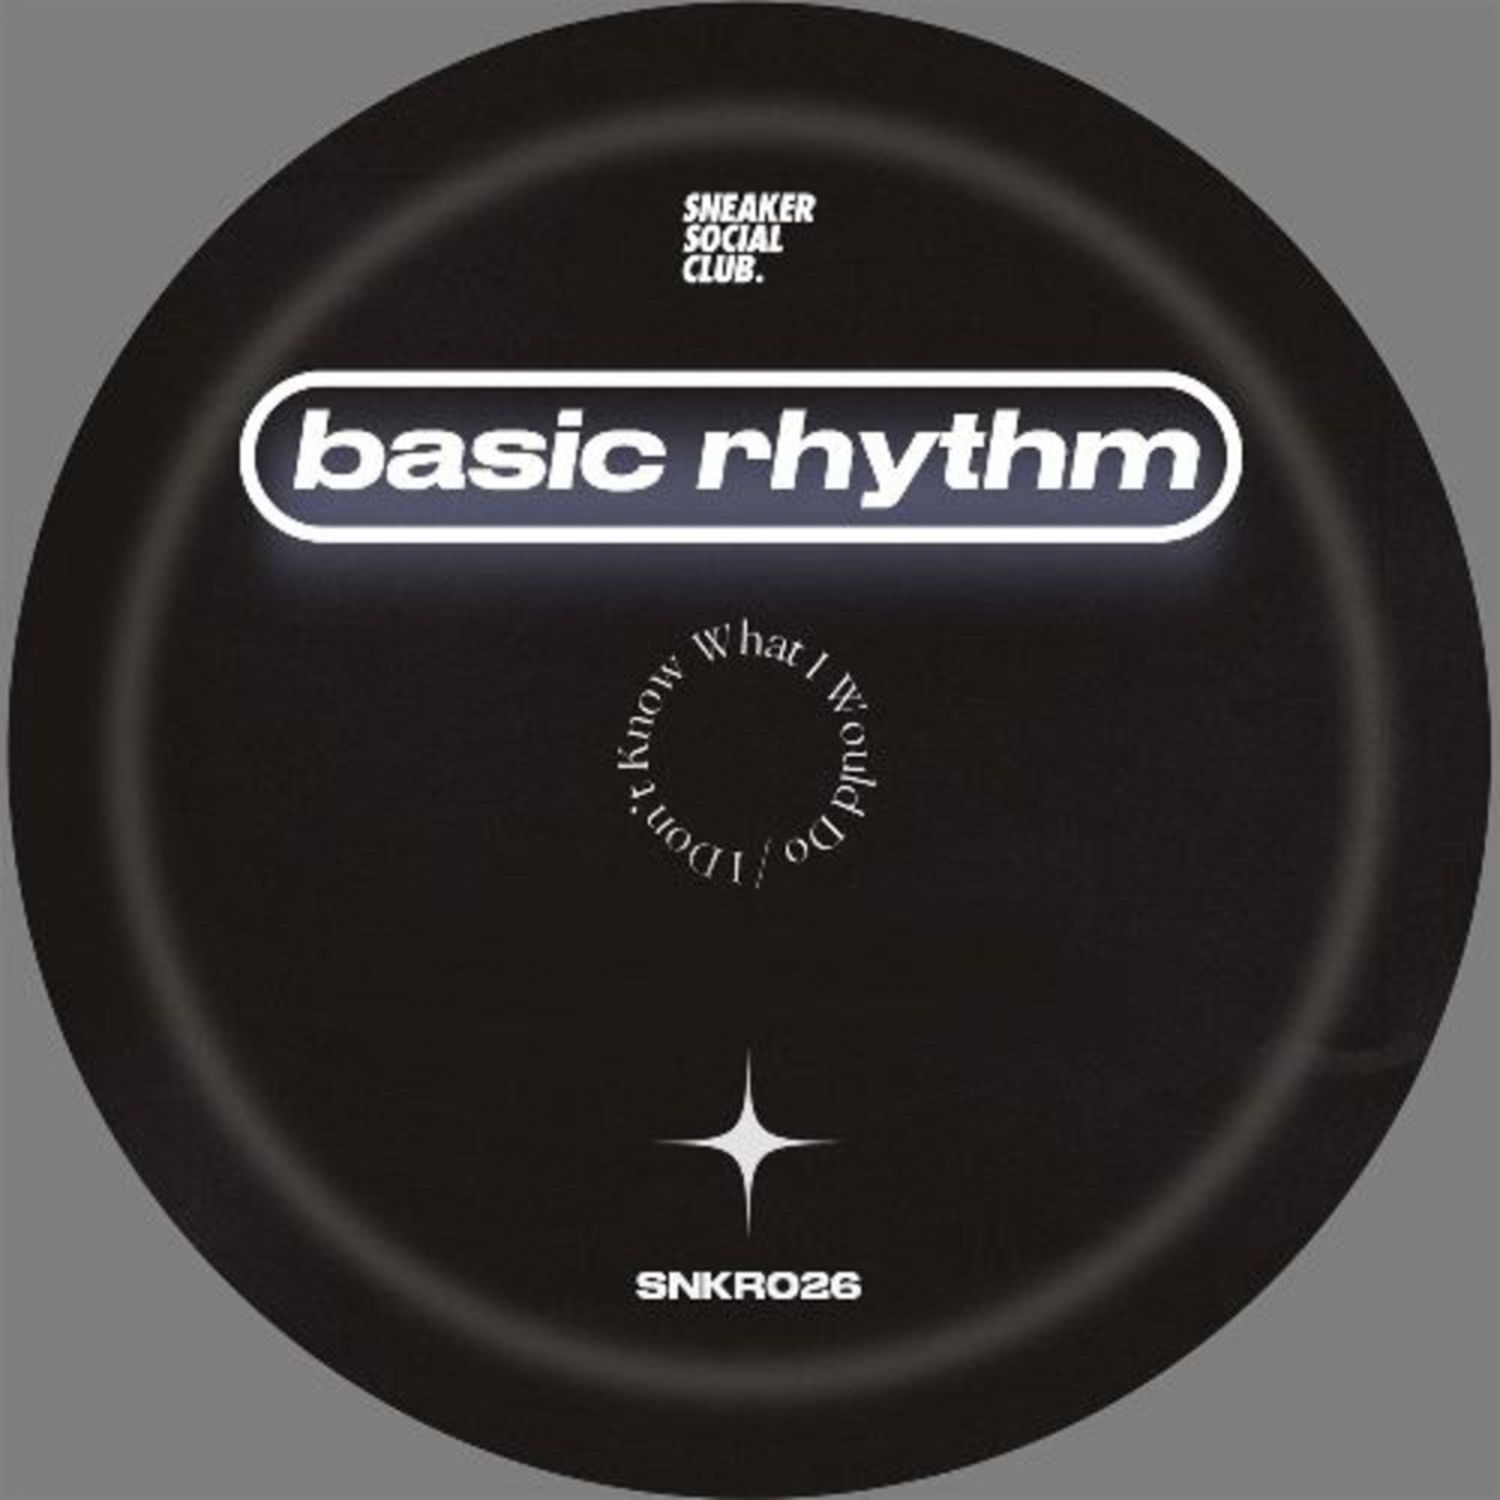 Bsic Rhythm - I DON T KNOW WHAT I WOULD DO